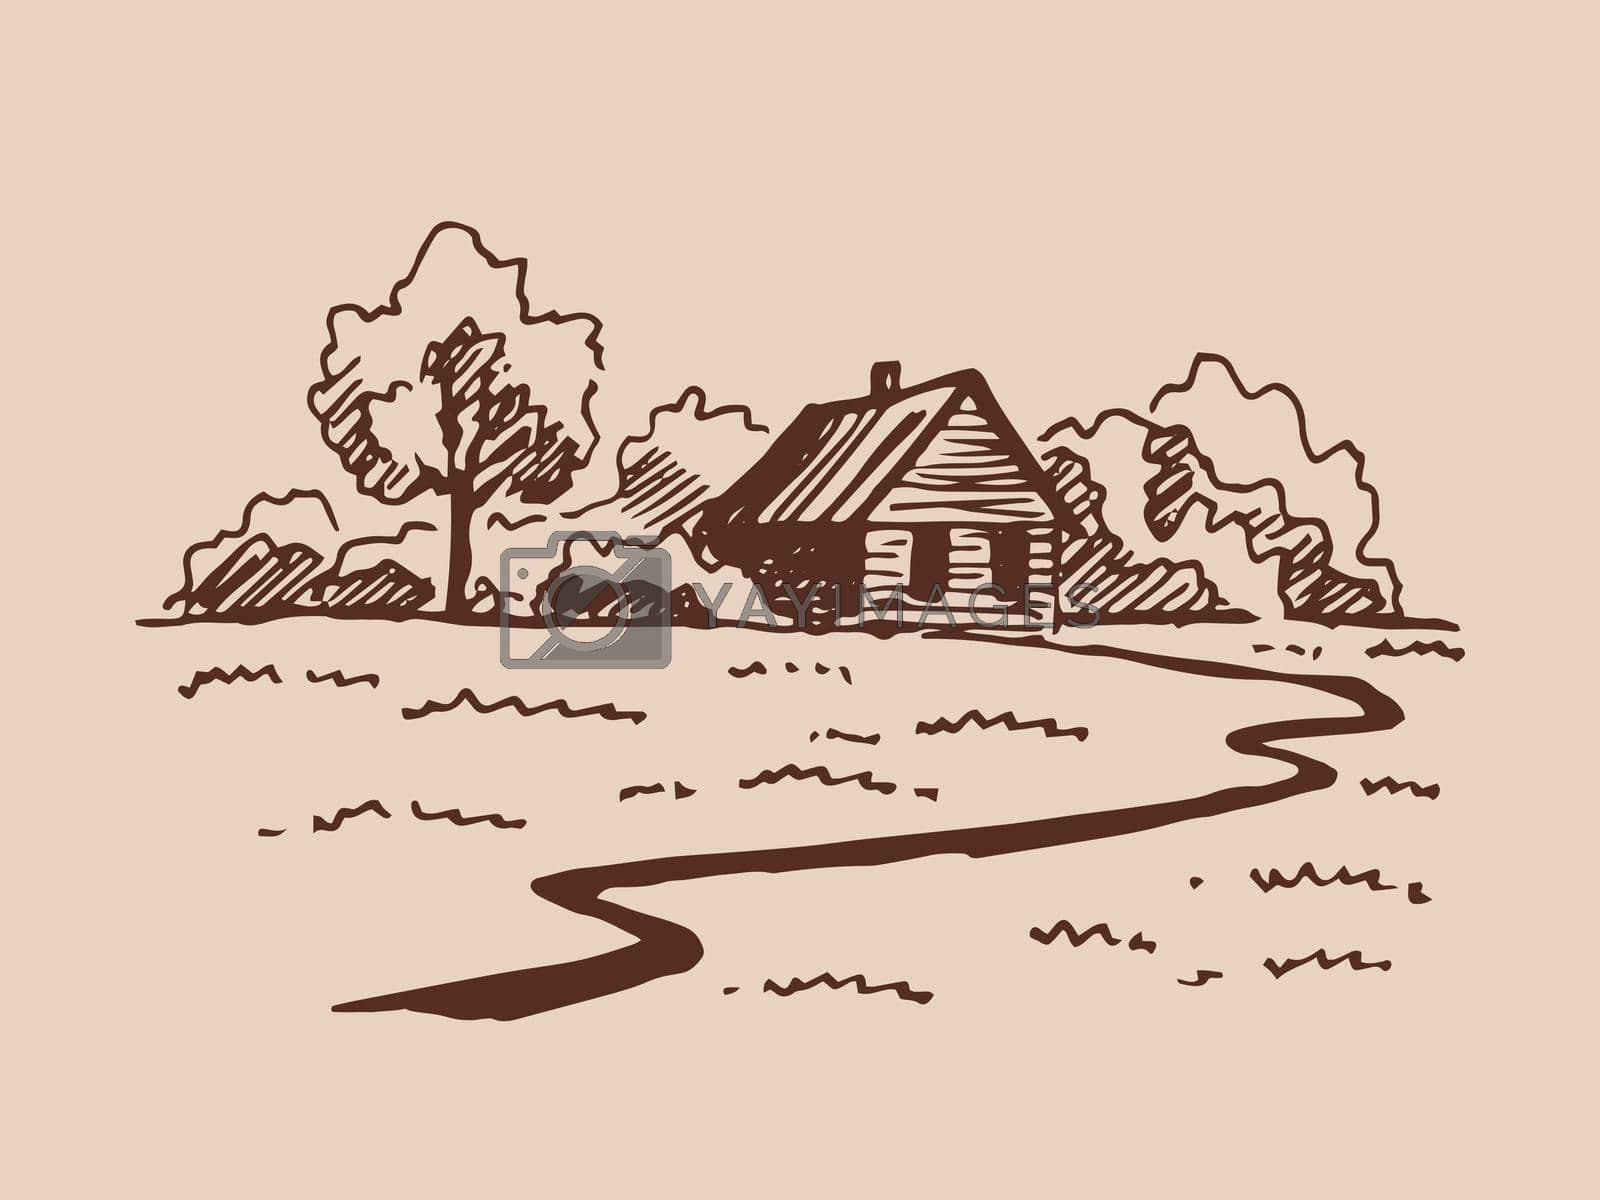 Landscape with country house. Hand drawn illustration converted to vector.